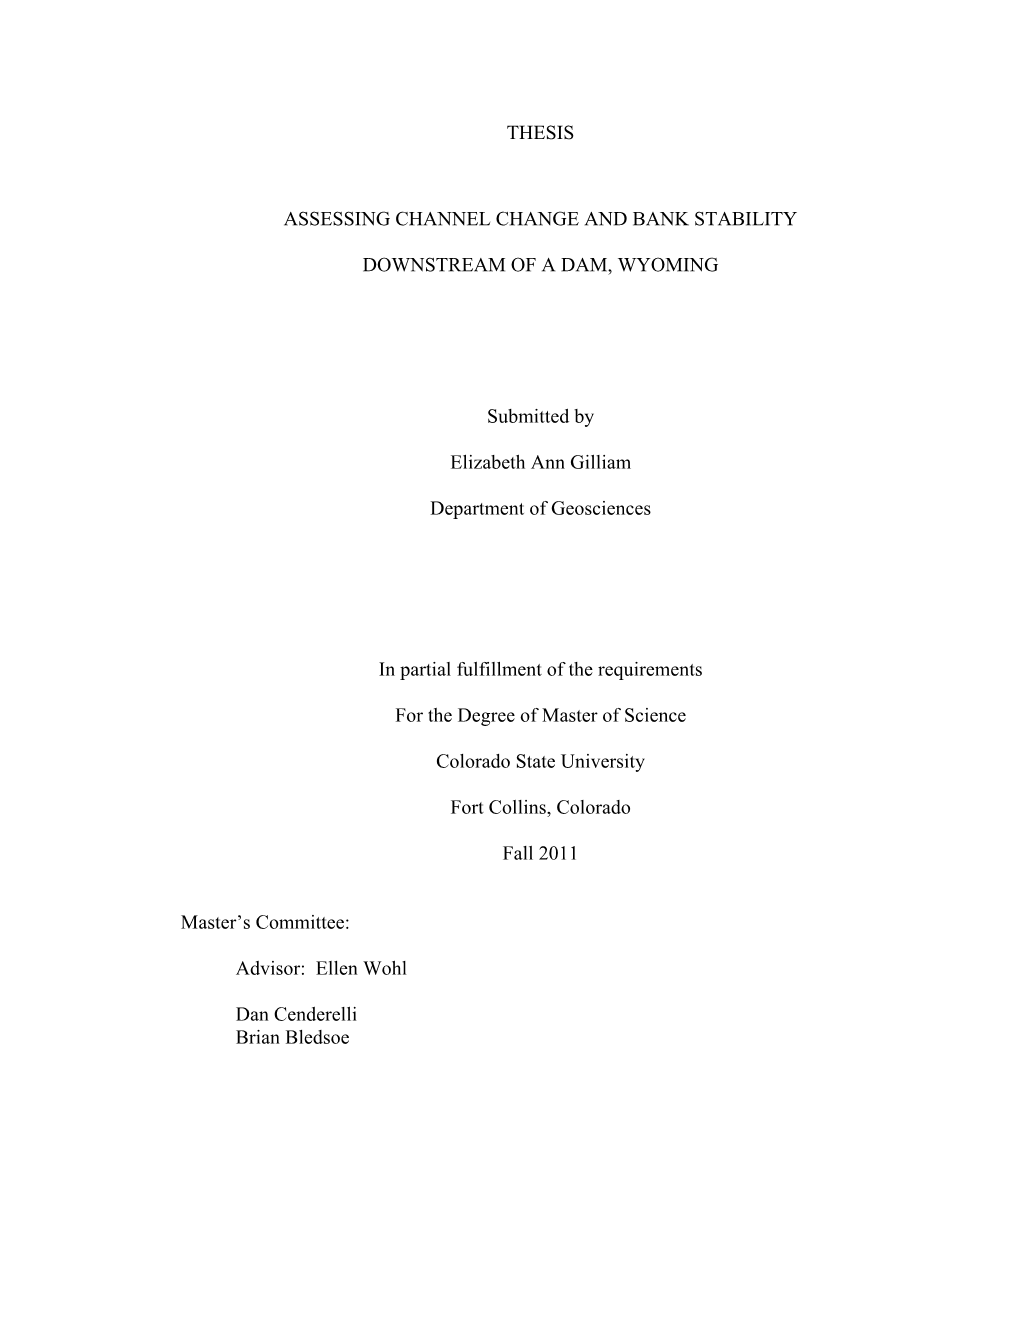 Thesis Assessing Channel Change and Bank Stability